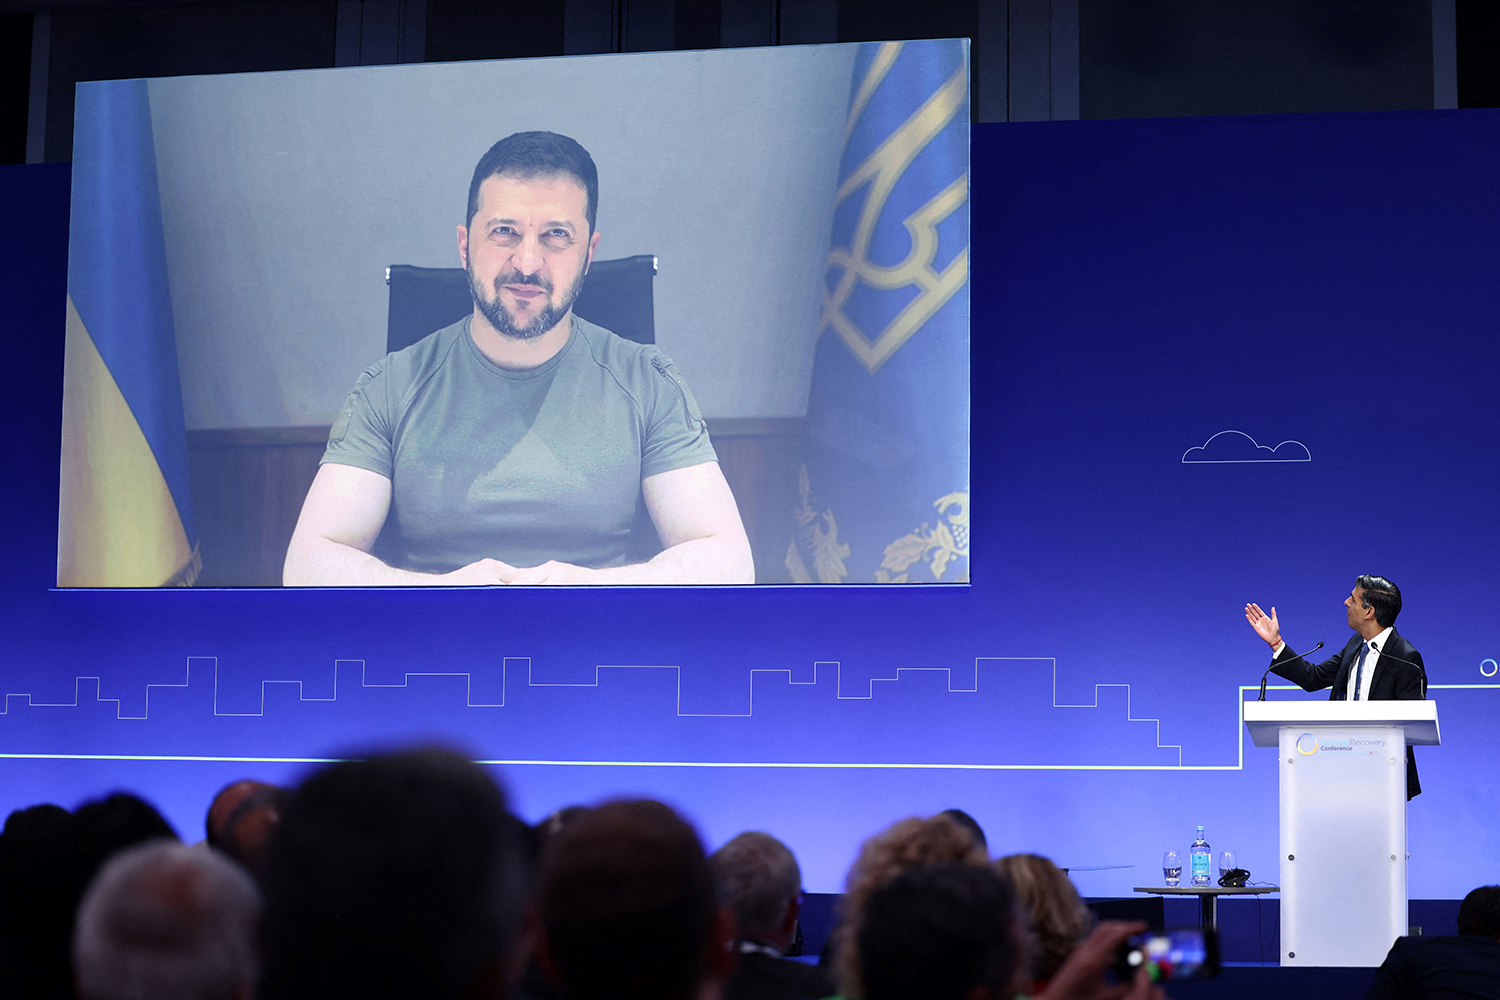 Ukraine's President Volodymyr Zelensky appears on a screen above a stage during the Ukraine Recovery Conference